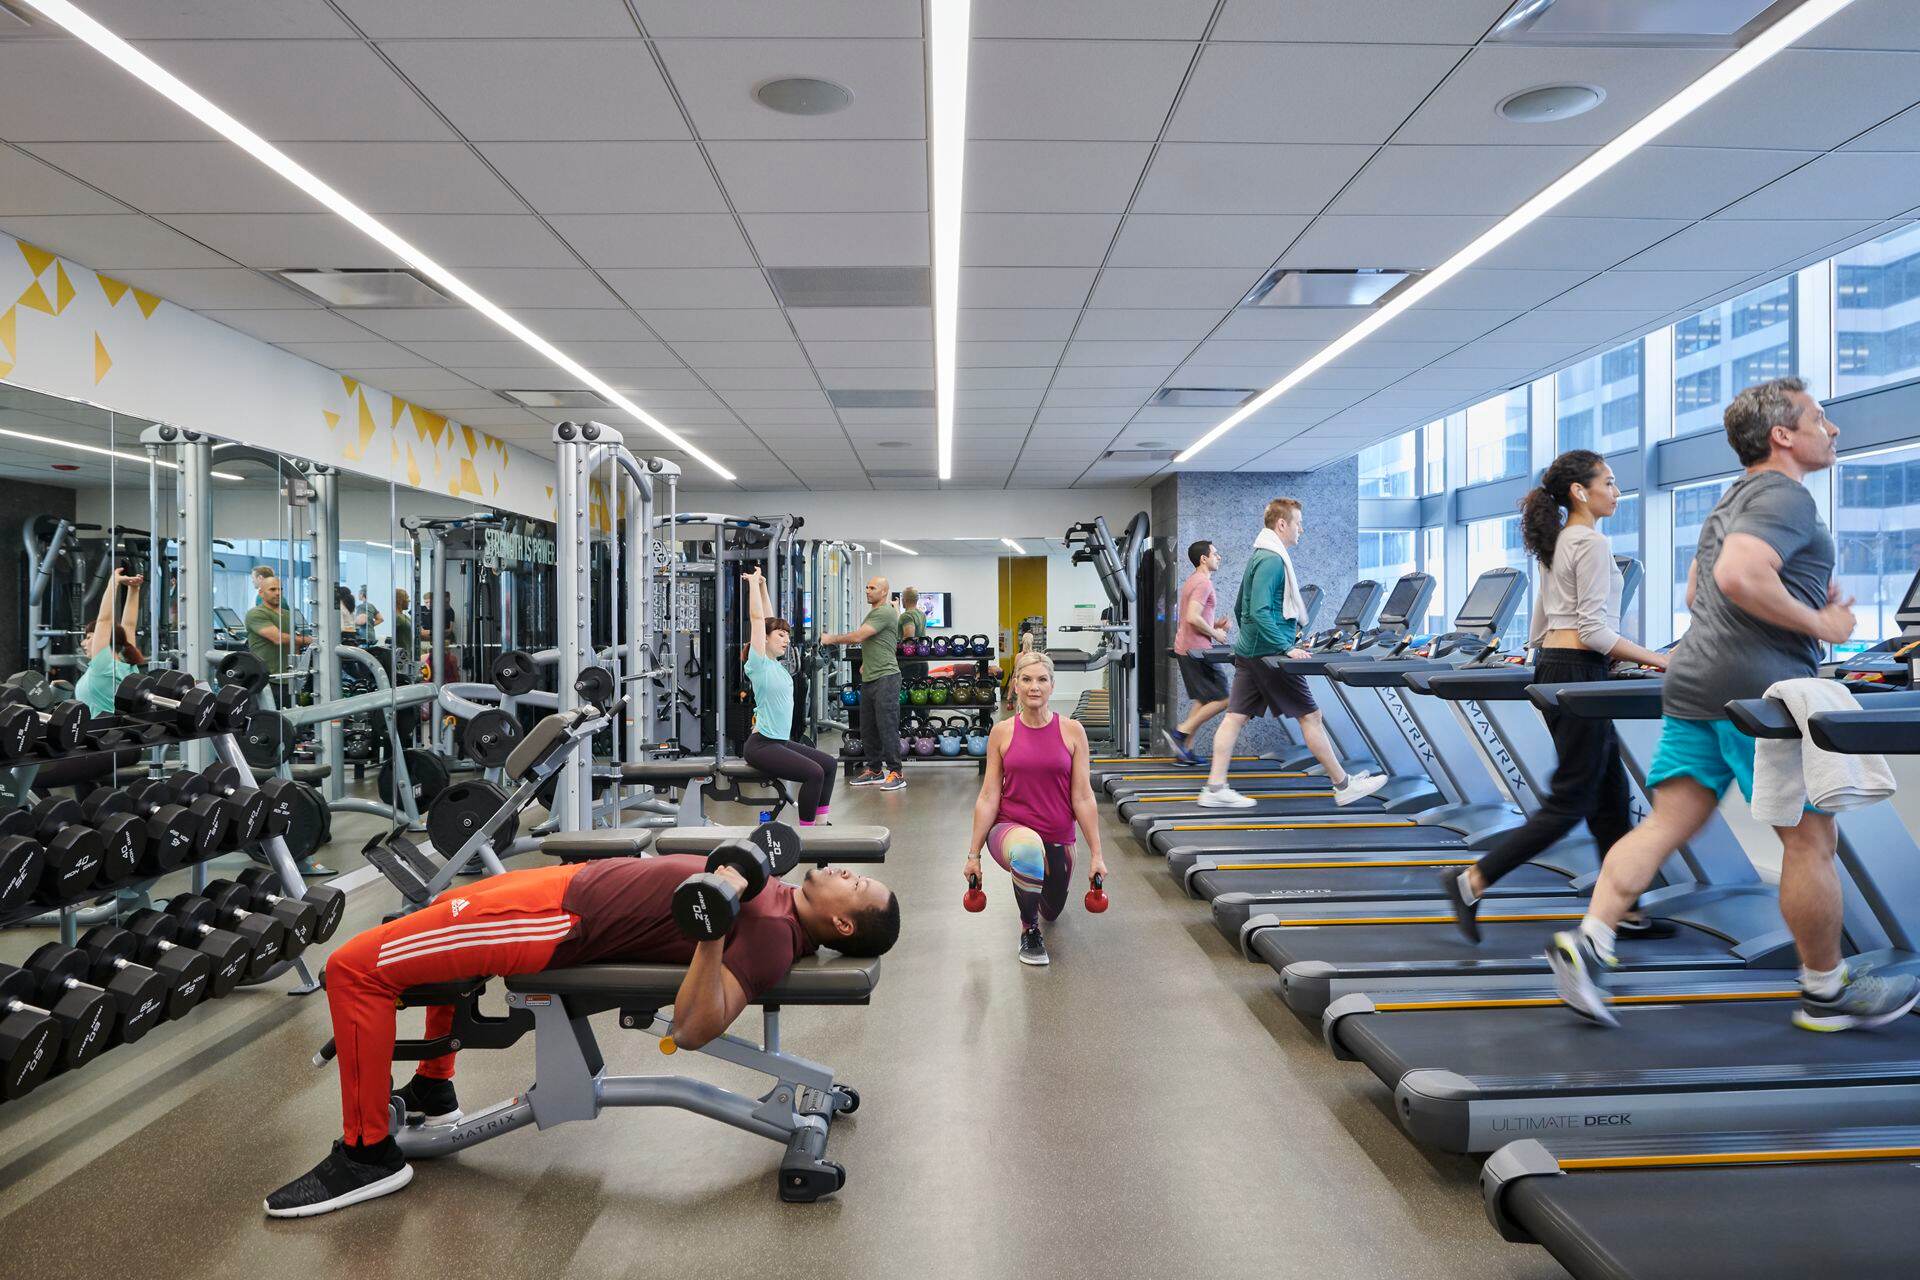 Interior view of the Kinetic fitness center at One North Wacker in West Loop, Chicago., IL.